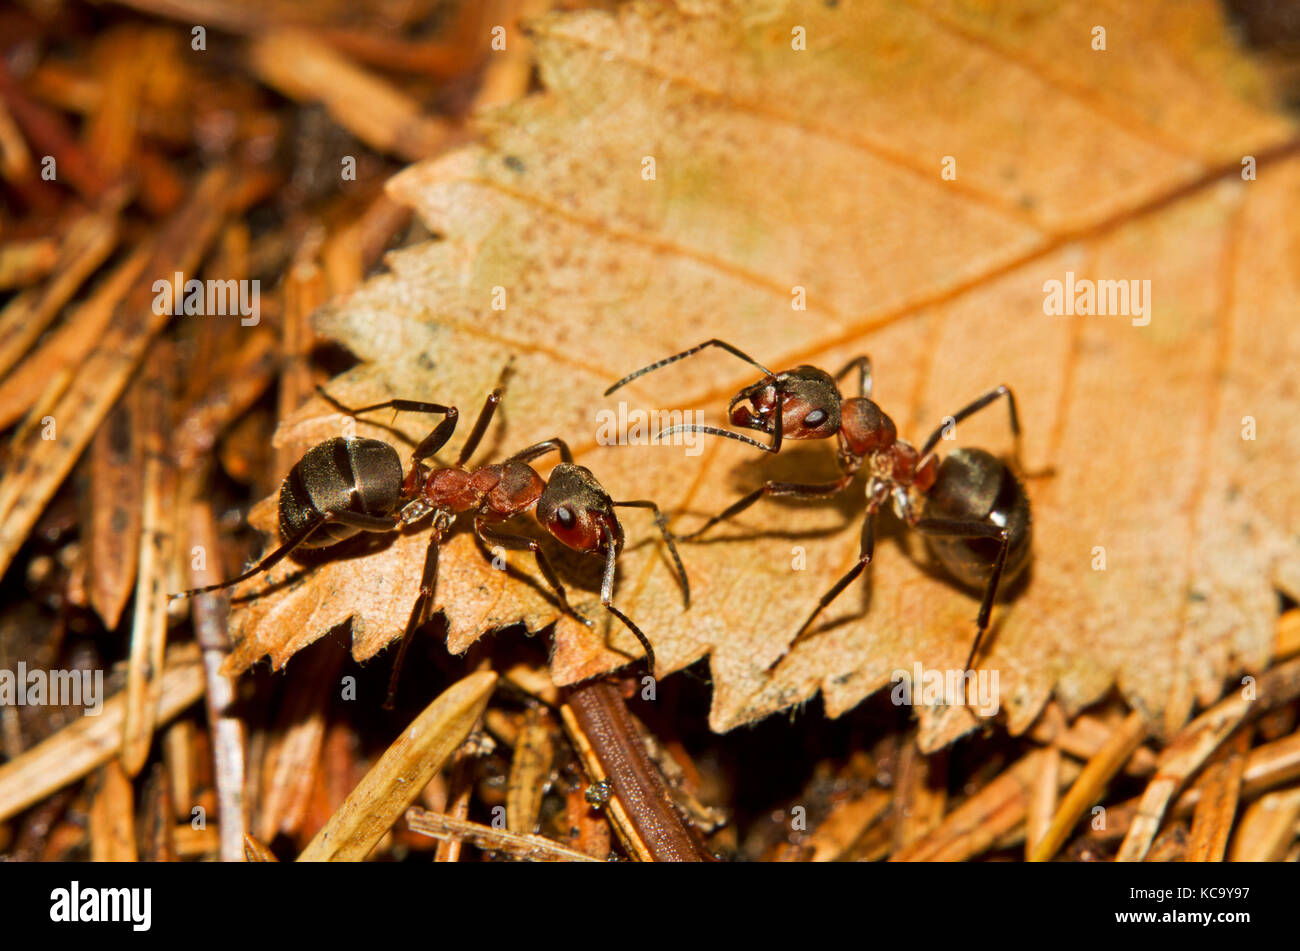 Two Red wood ants on a brown leaf Stock Photo